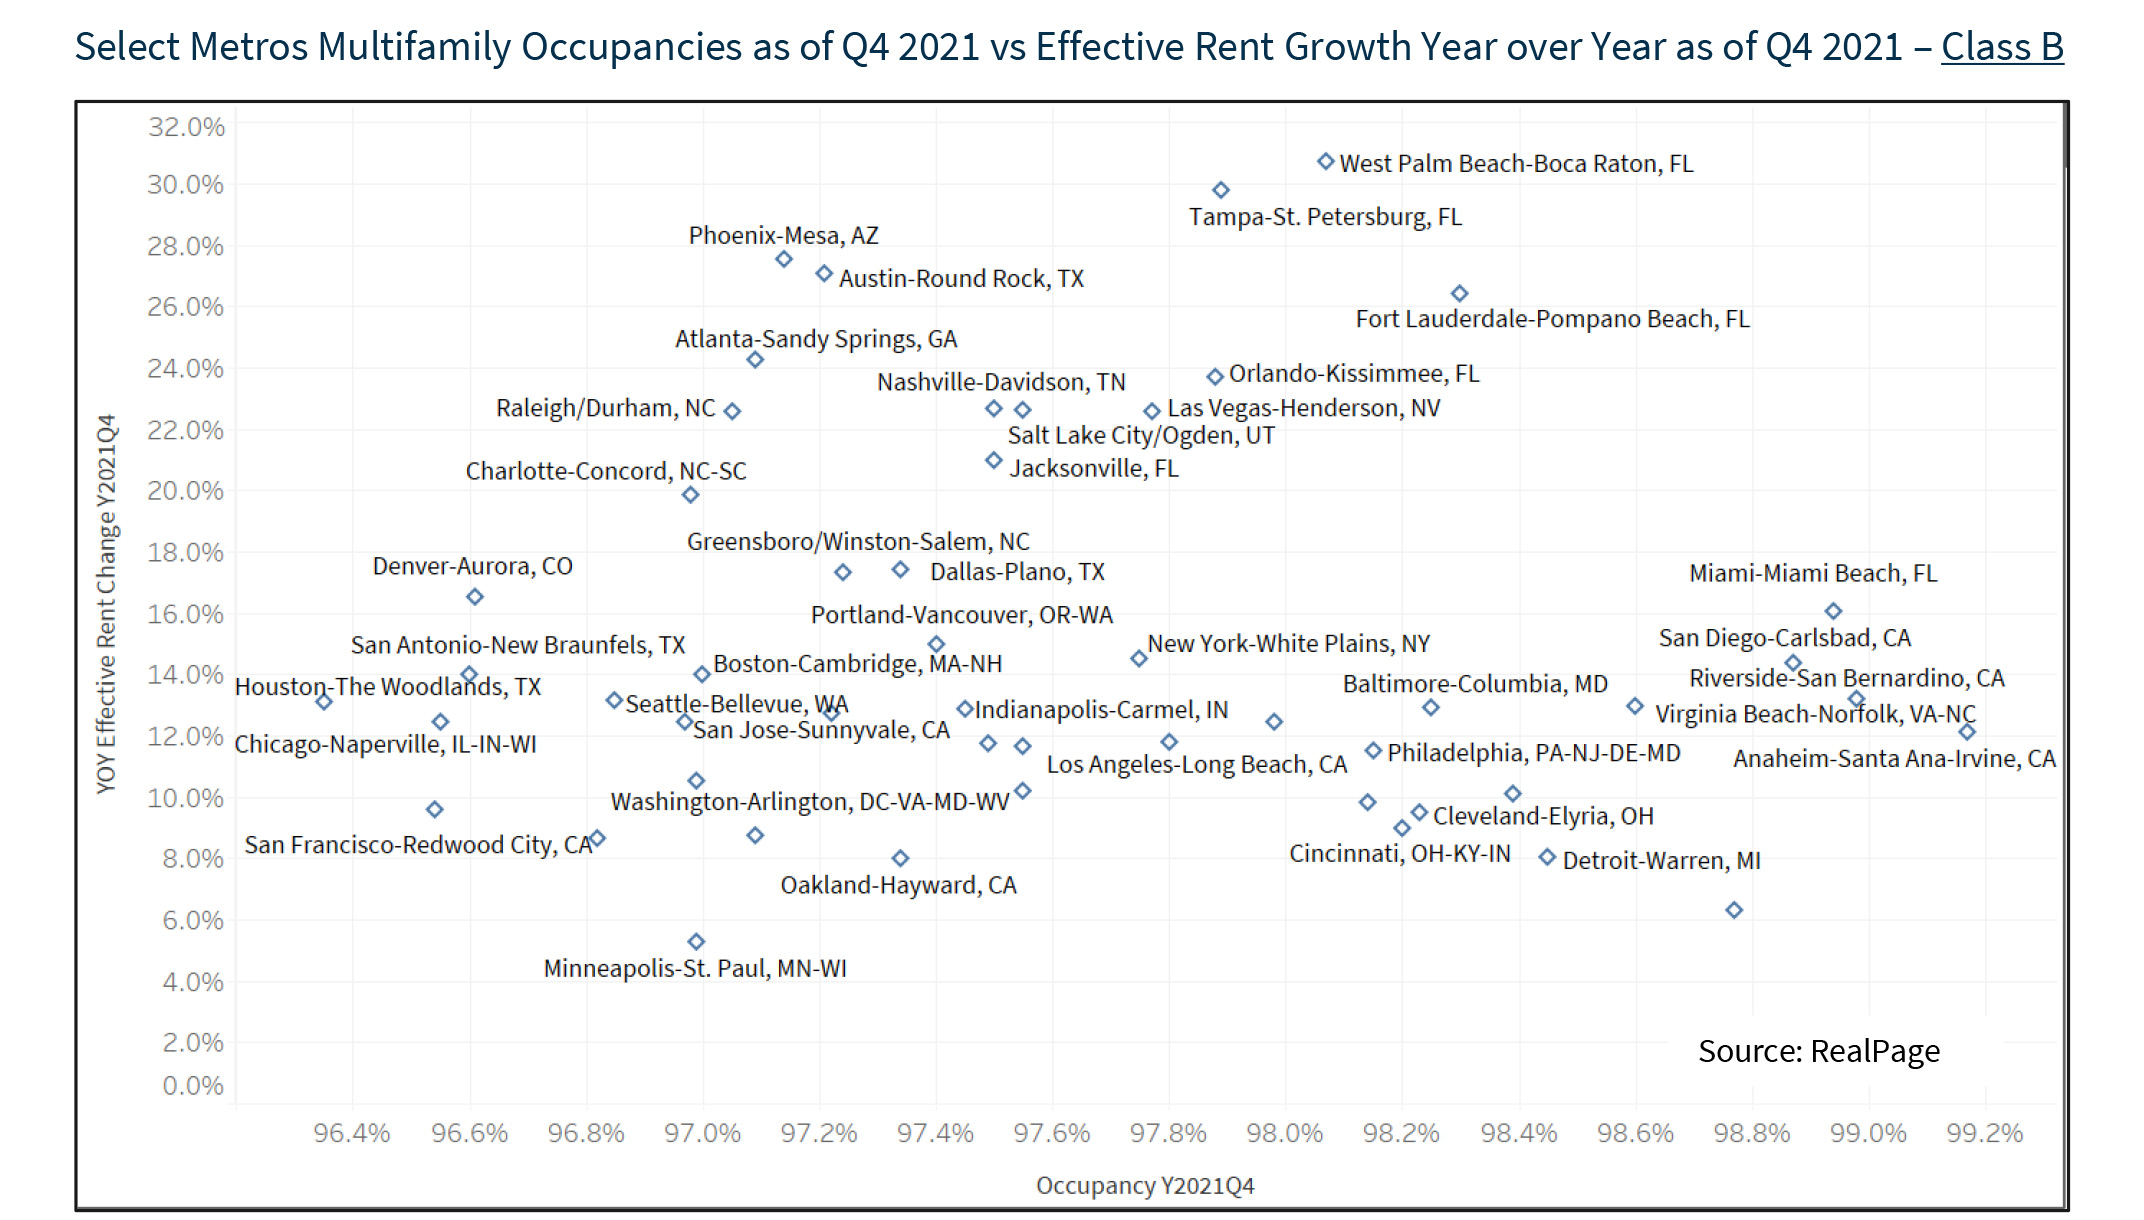 Select Metros Multifamily Occupancies as of Q4 2021 vs Effective Rent Growth Year over Year as of Q4 2021 – Class B